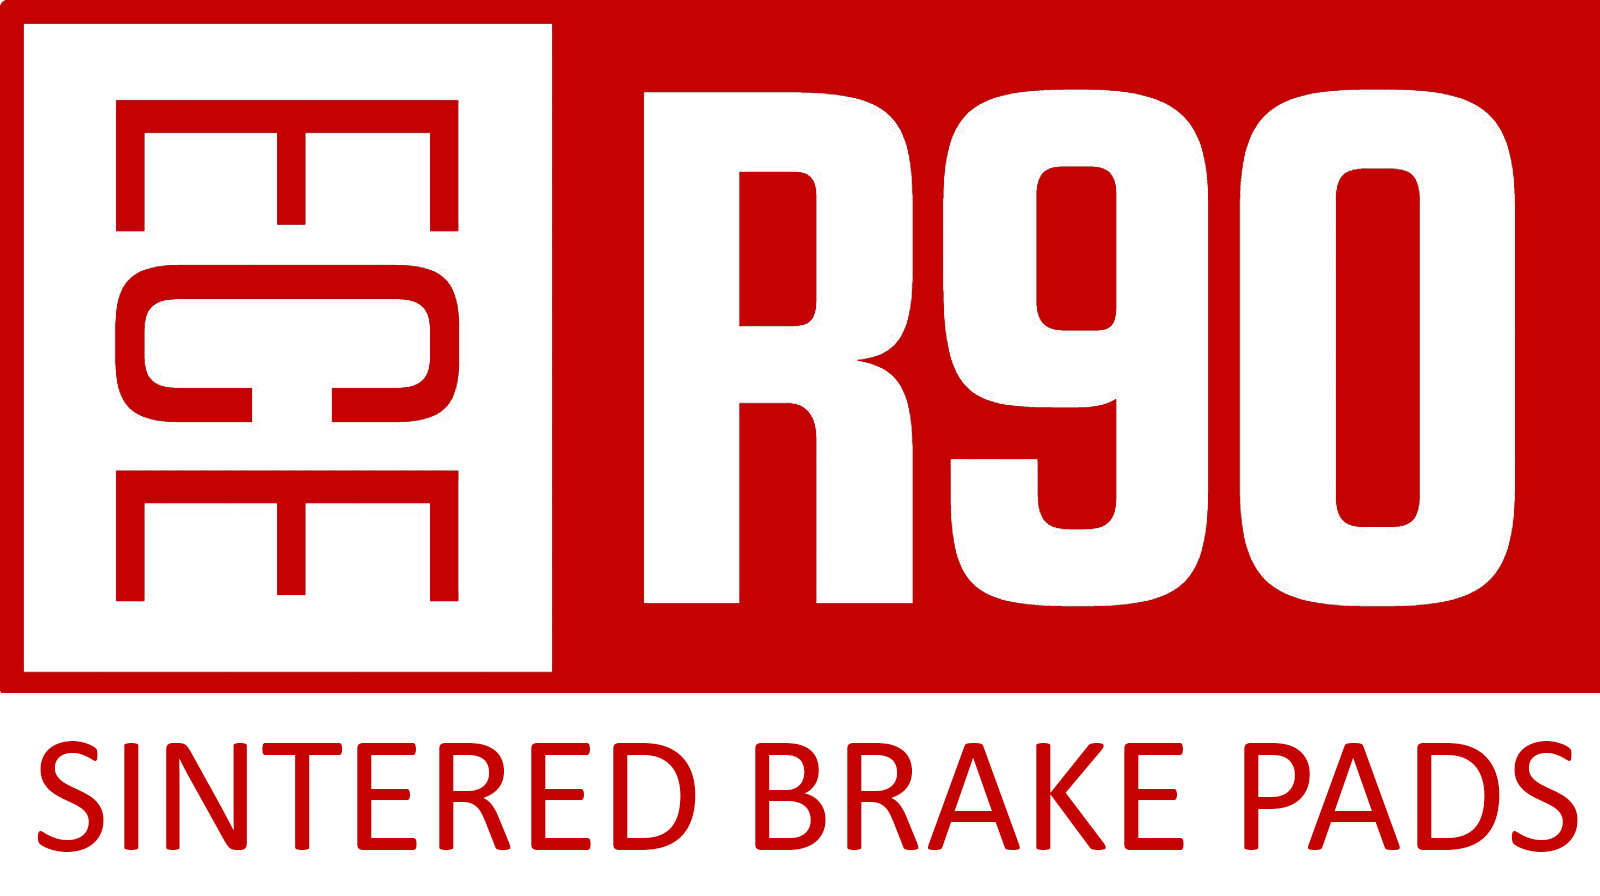 Certifications ECE R 90 for sintered pro brake pads